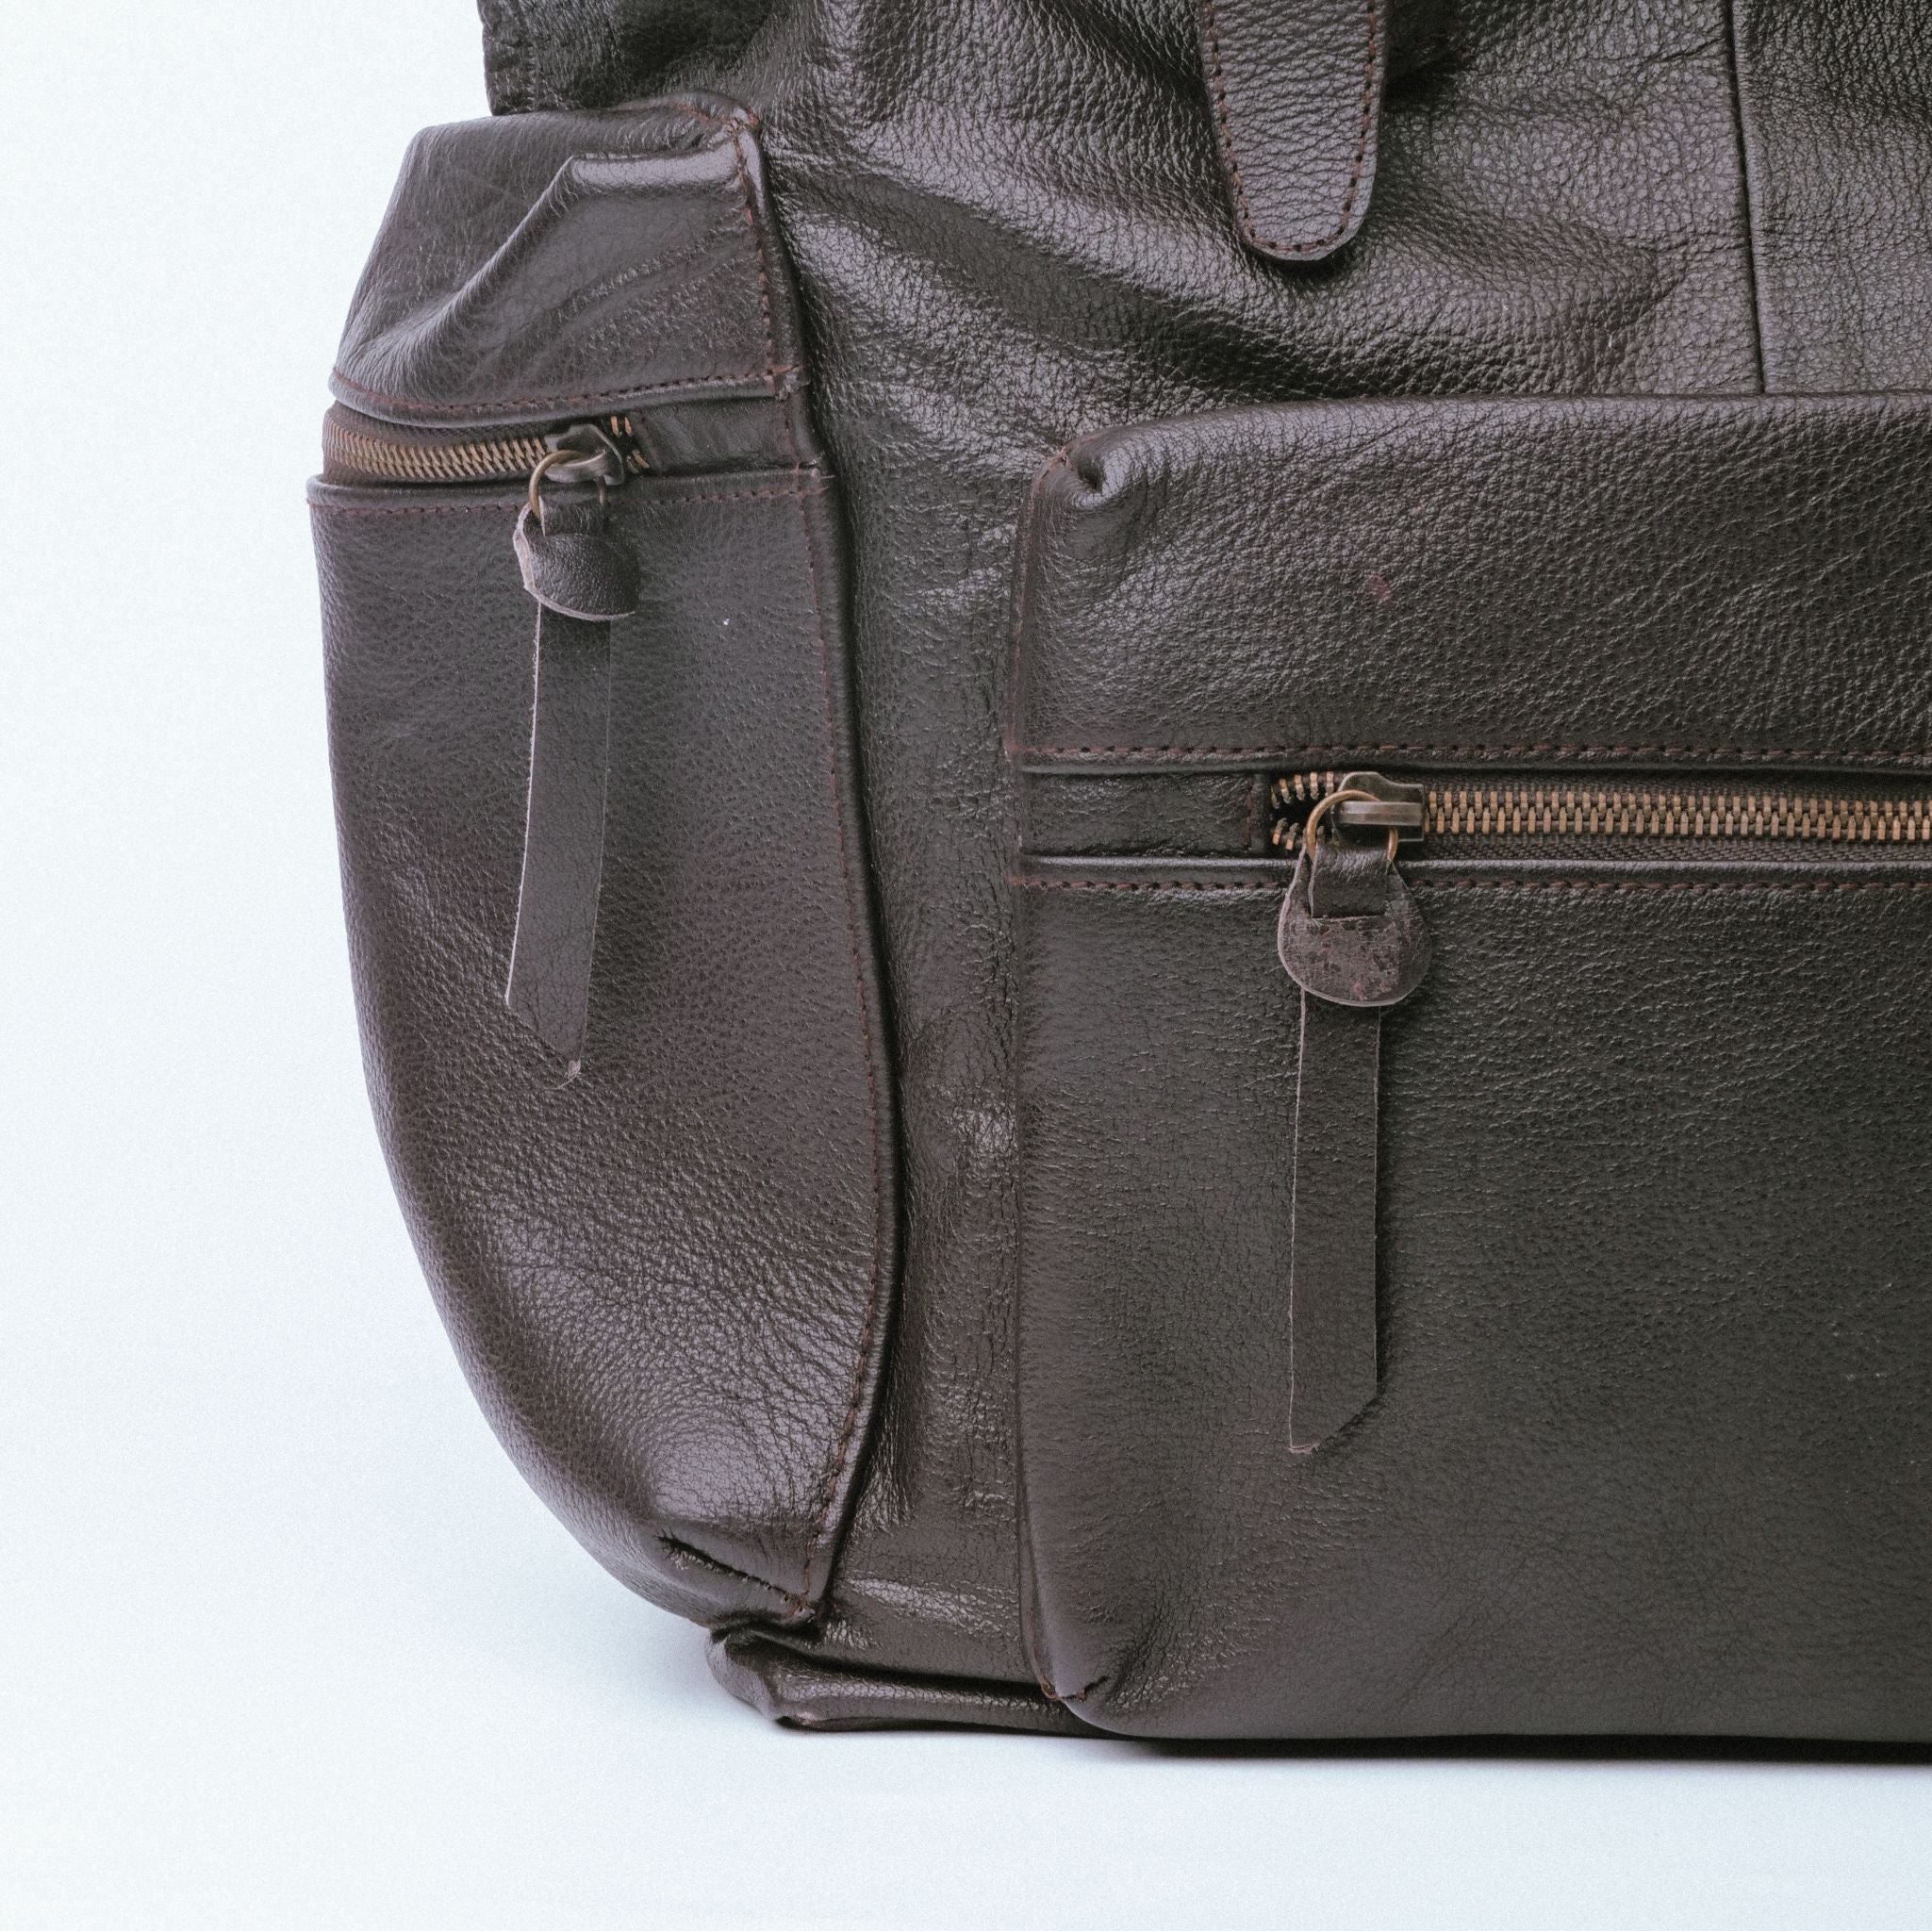 Brown Leather Backpack Travel Laptop Office Bag